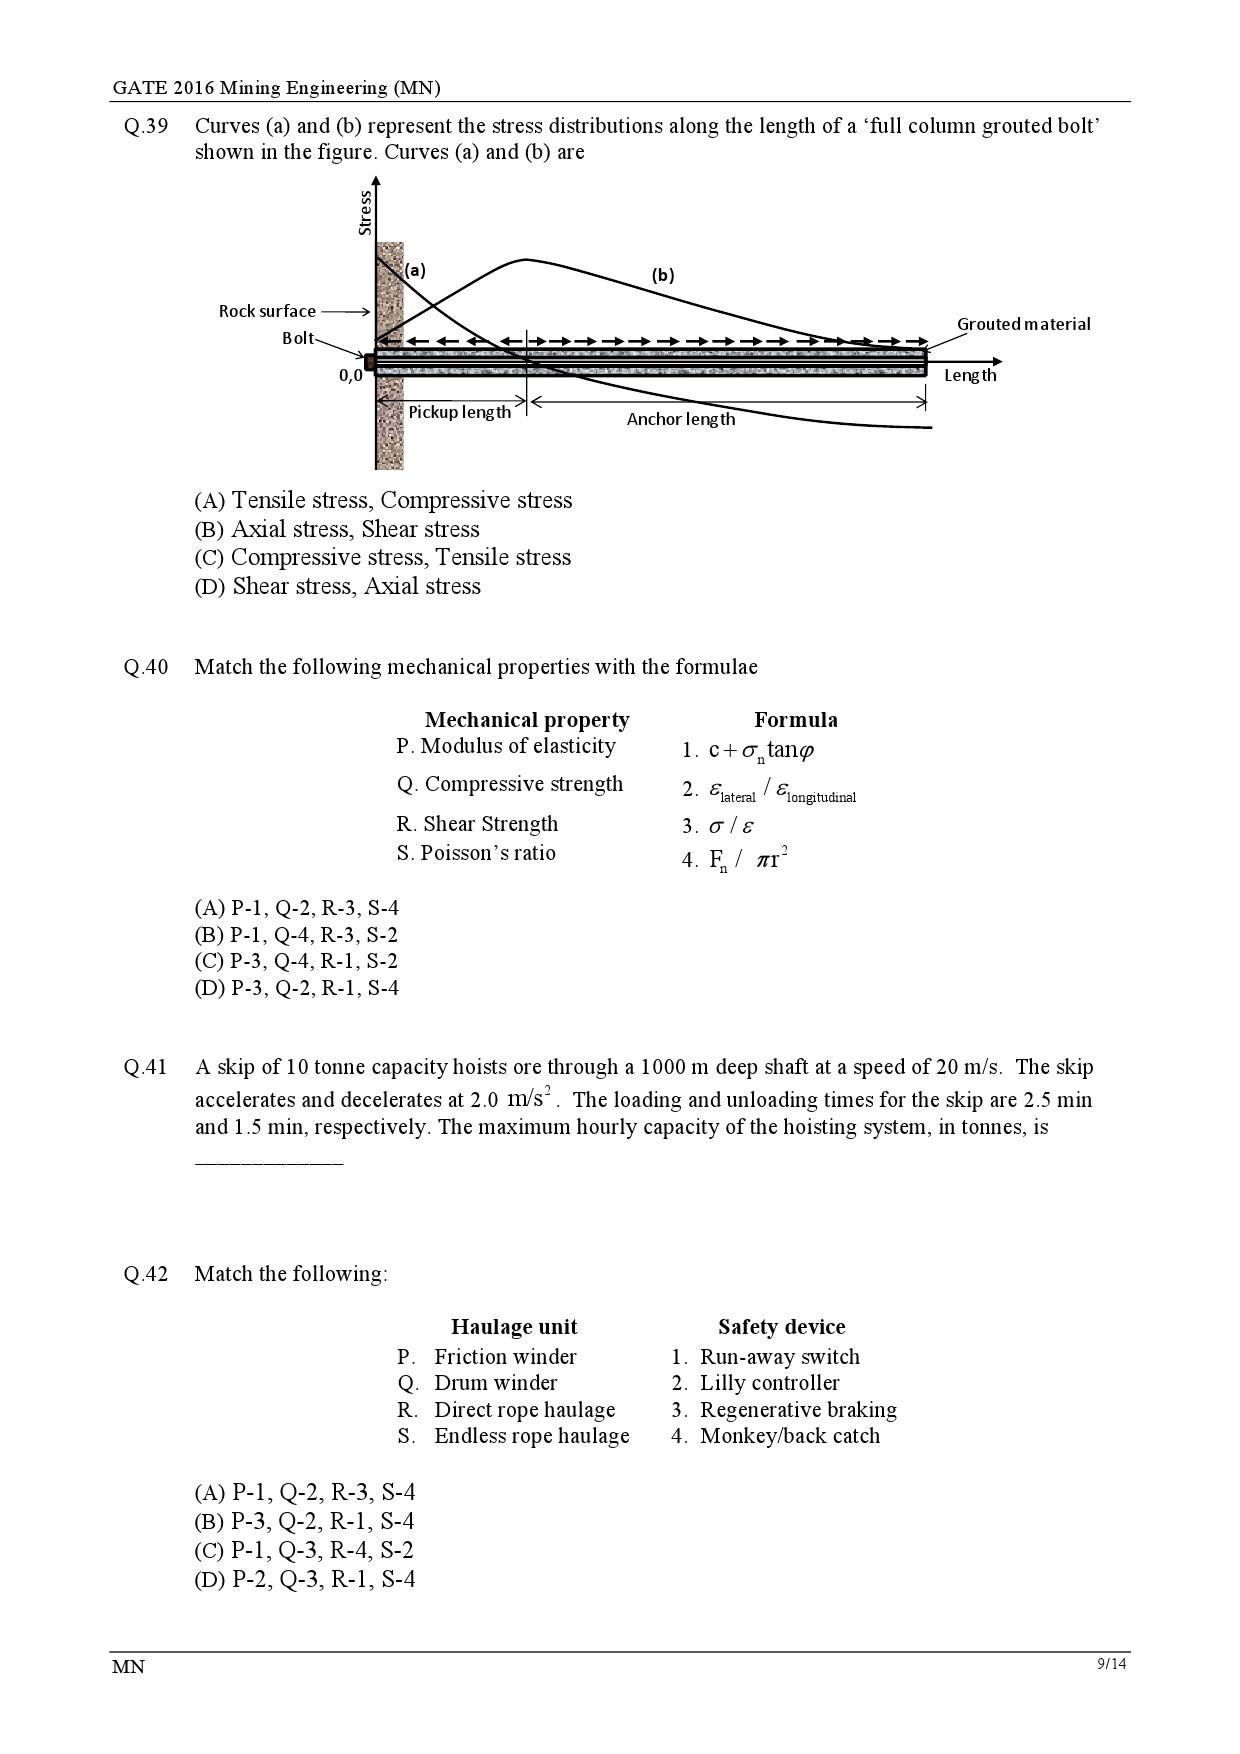 GATE Exam Question Paper 2016 Mining Engineering 12